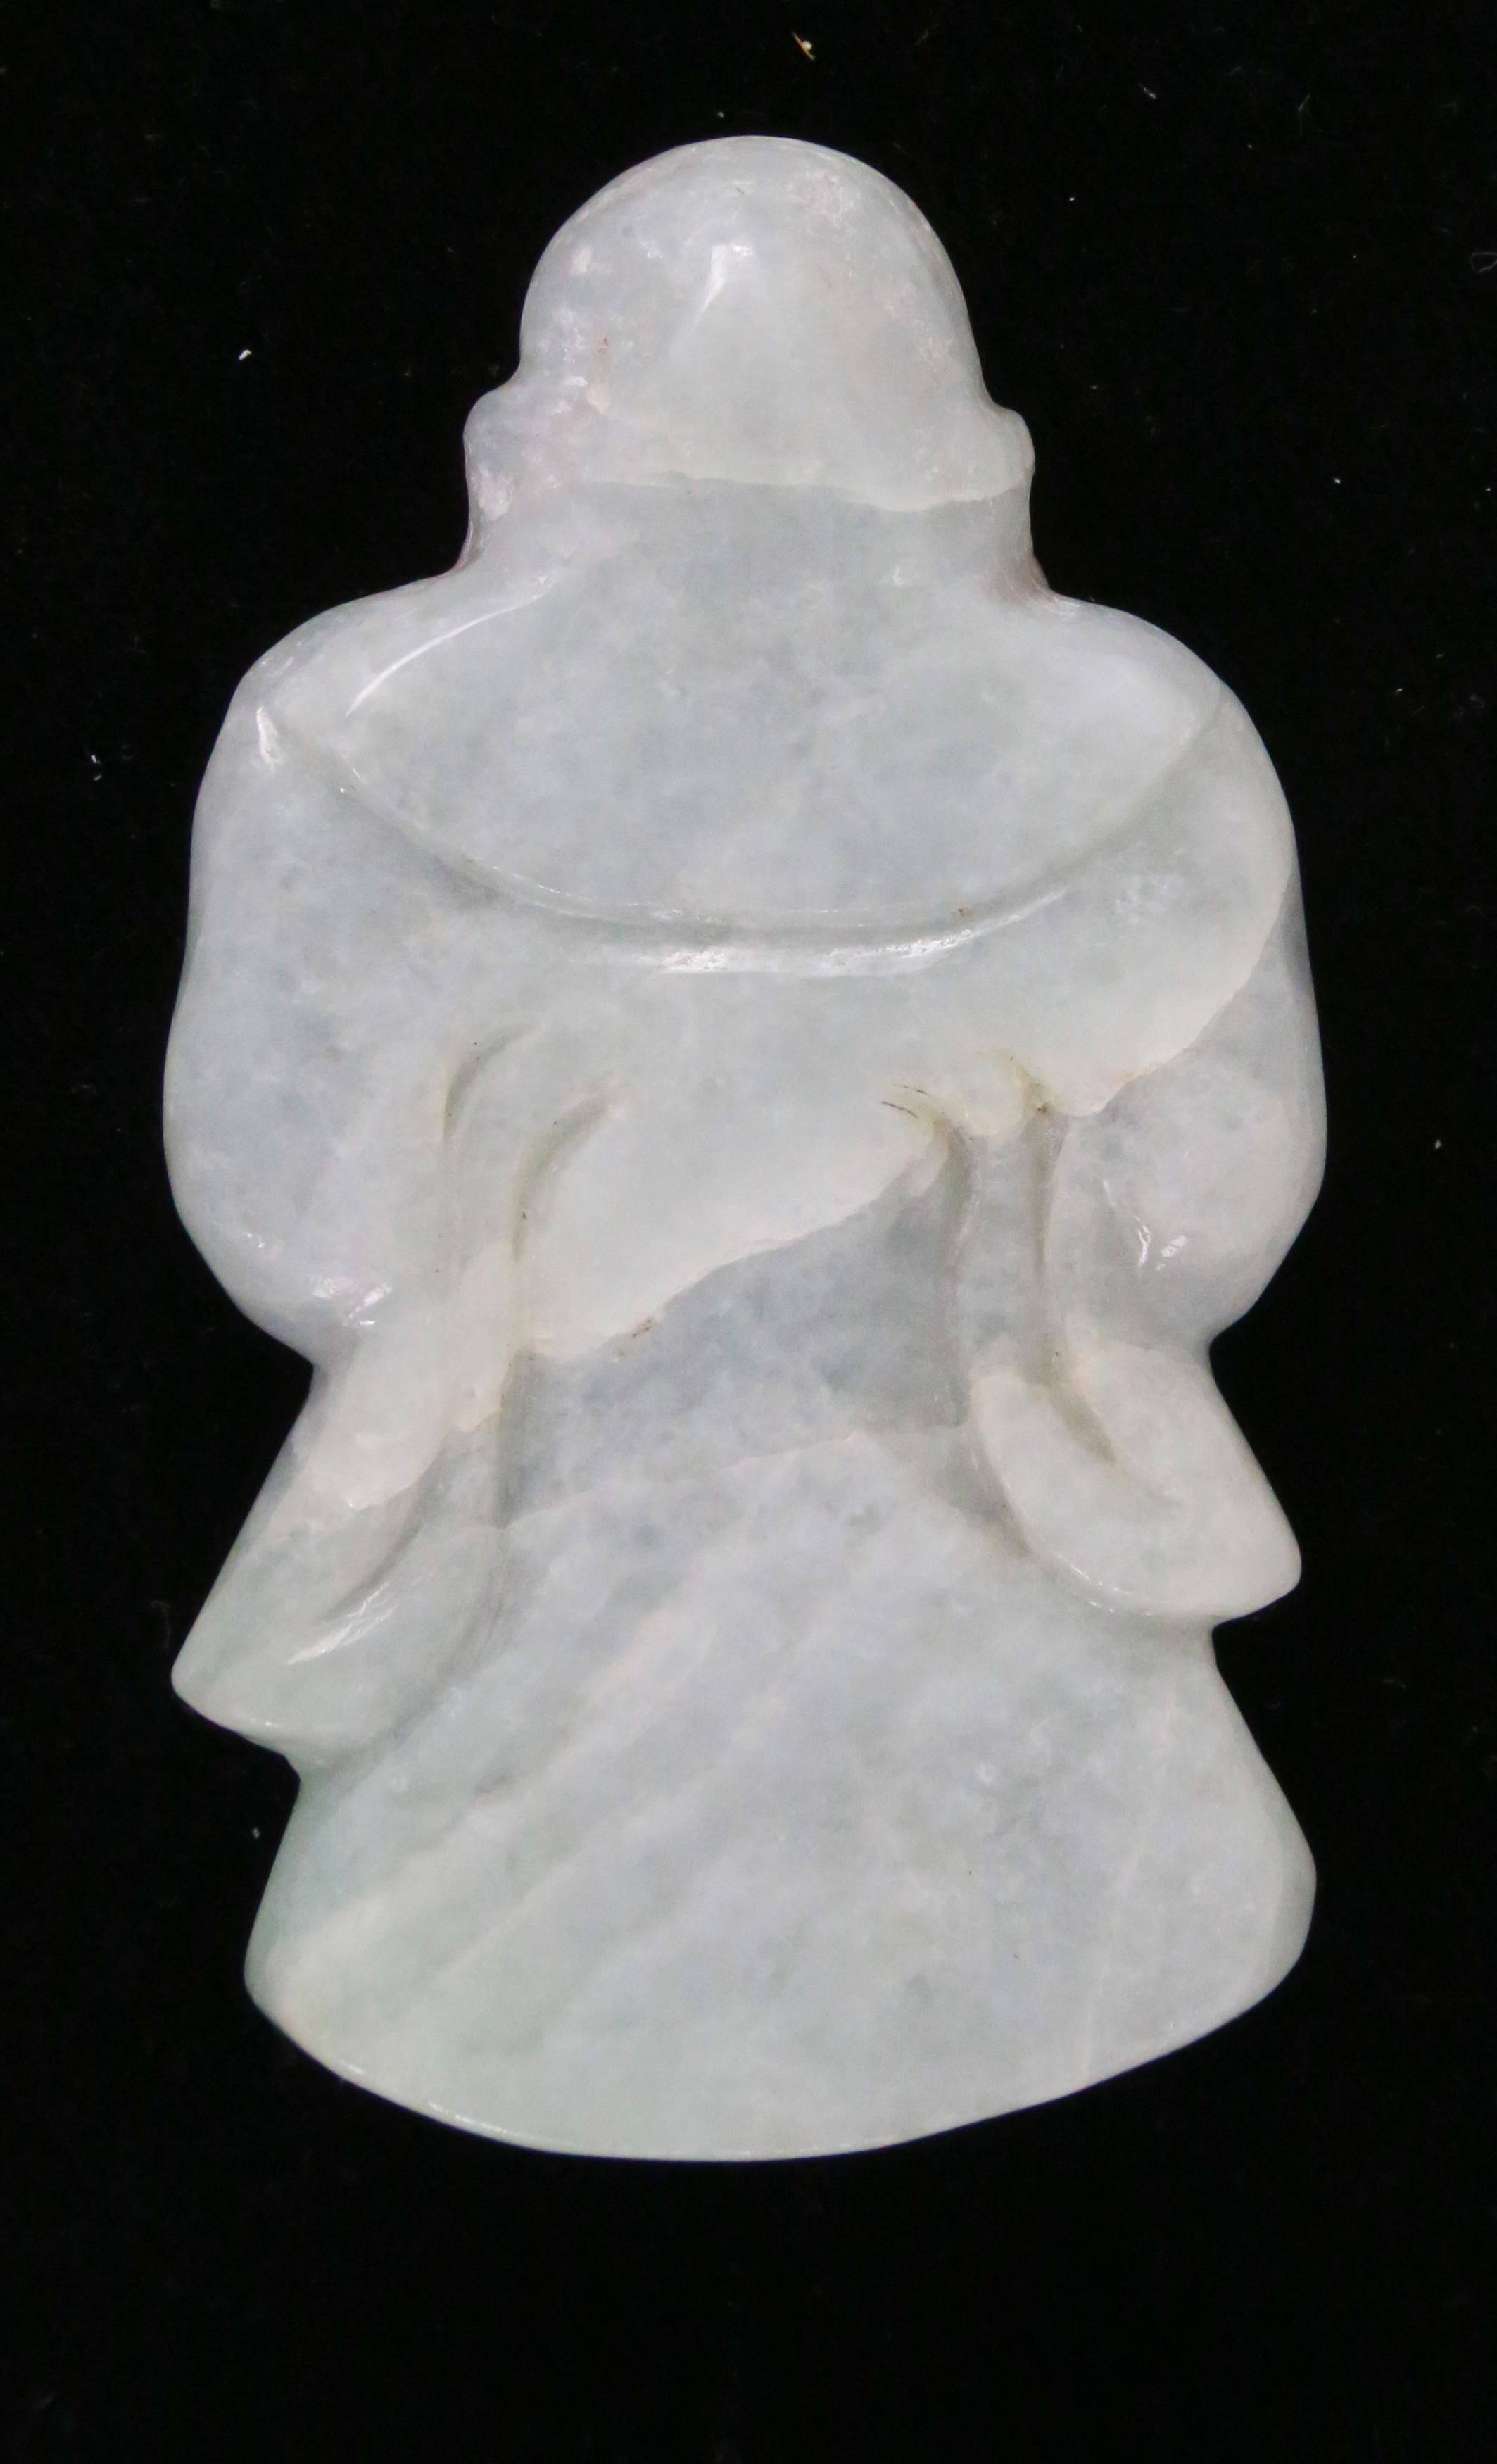 High quality Antique Natural Jade Jadeite Carving; beautiful translucency, when held to the light, the carving shows off a subtle variation of soft green; step-cut shape and subtle melding of colors shimmering within a smooth purity; it marries